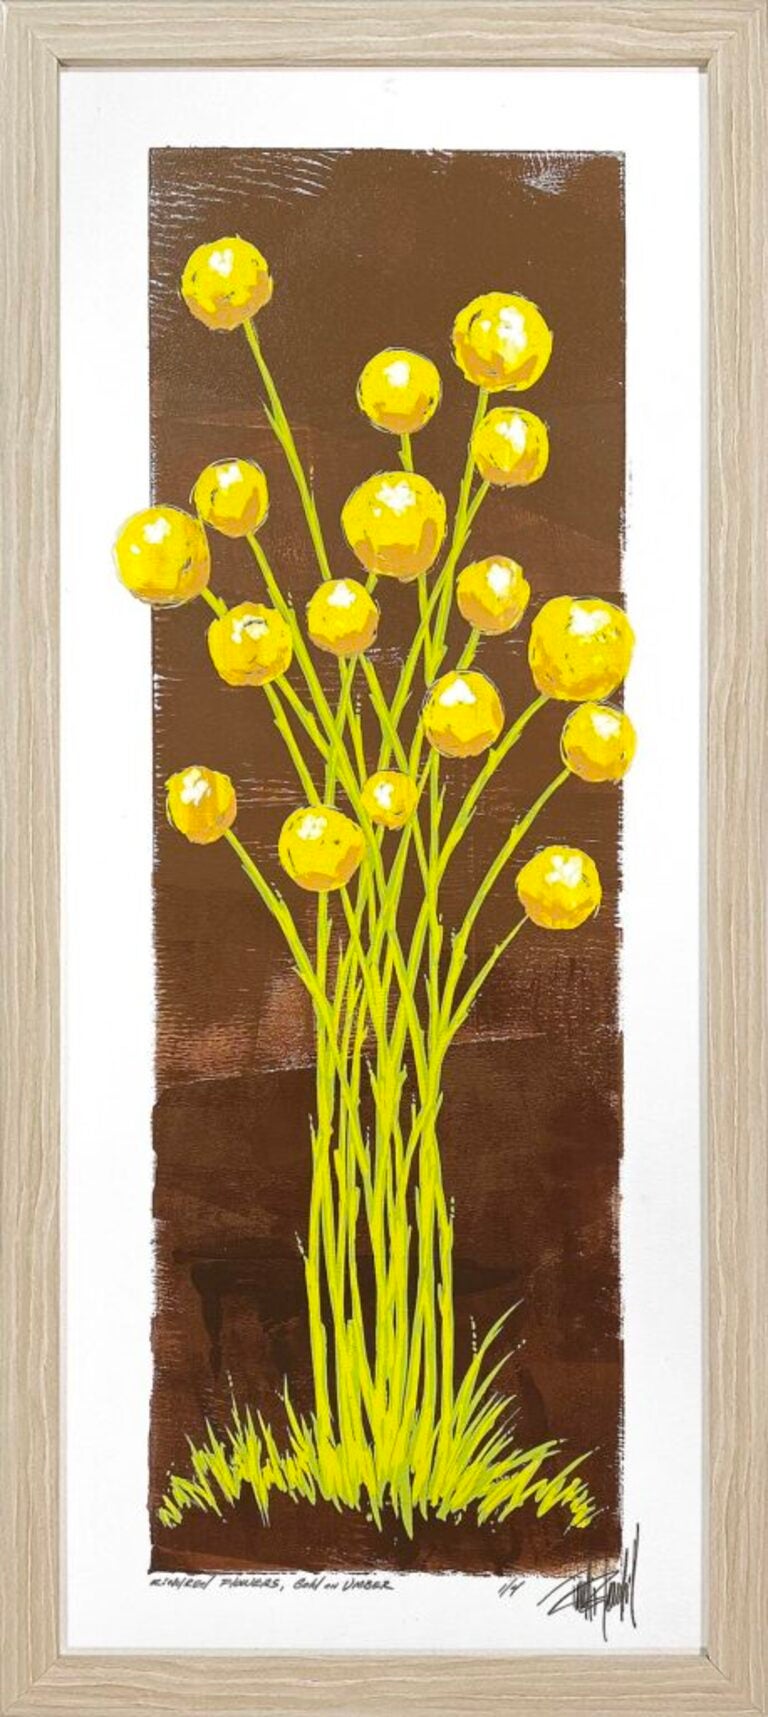 Kindred Flowers, Gold on Umber (1/4) - Print by Terrell Thornhill 